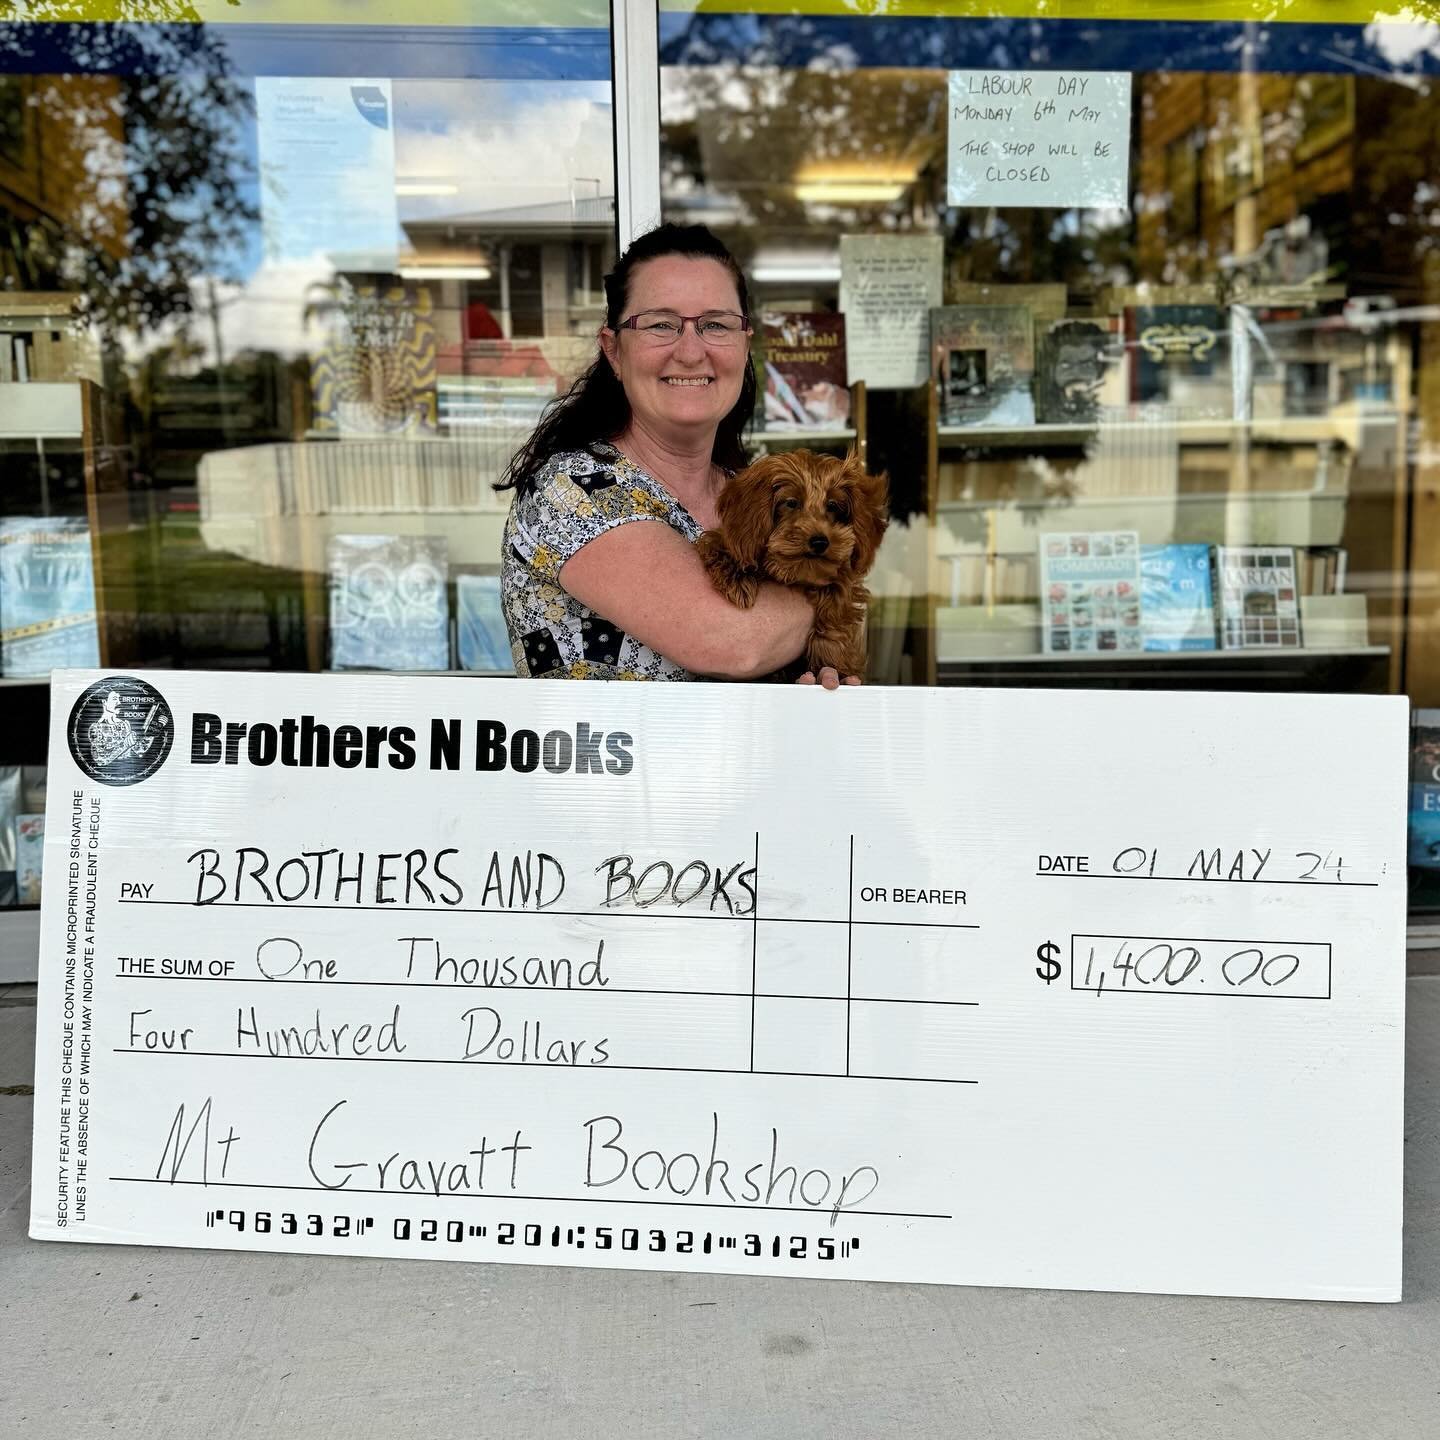 A massive thank you to the Mount Gravatt Bookshop and the amazing owner Cindy for her fantastic fundraising through book sales over the past 6 weeks which raised over $1,400 for Brothers and Books and the incredibly important @queensland_koala_societ